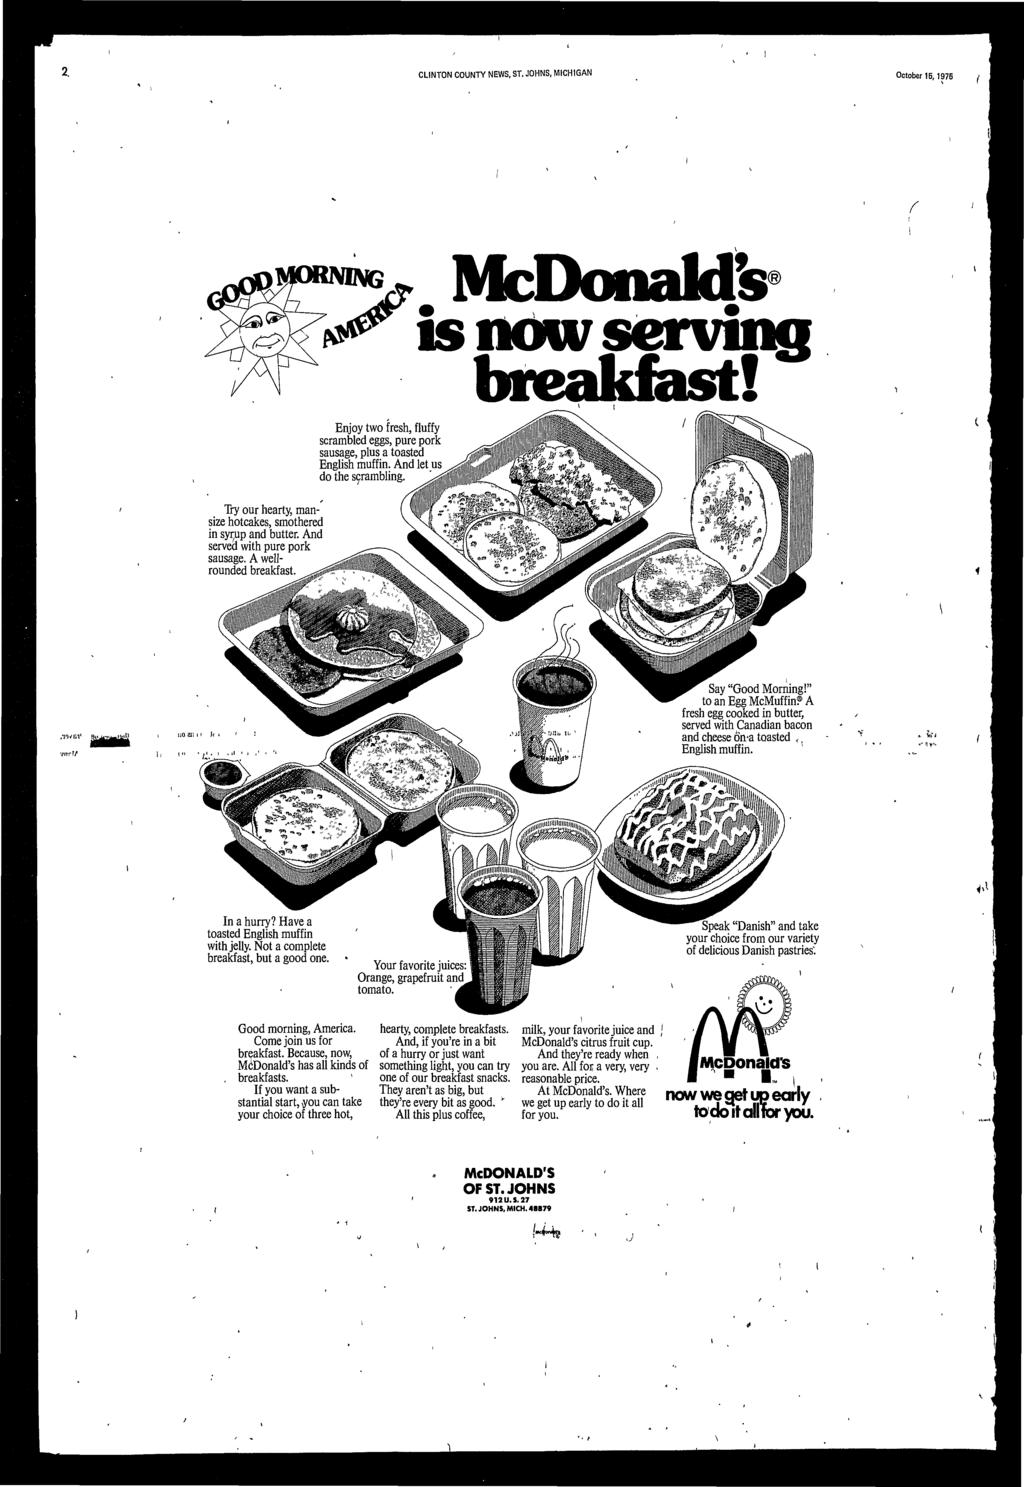 2. CLINTON COUNTY NEWS,, MICHIGAN October 15,1975 r -r McDonalds ^ s now servng breakfast! Enjoy two fresh scrambled eggs, pure sausage, plus a toasted Englsh muffn. And do the scramblng.